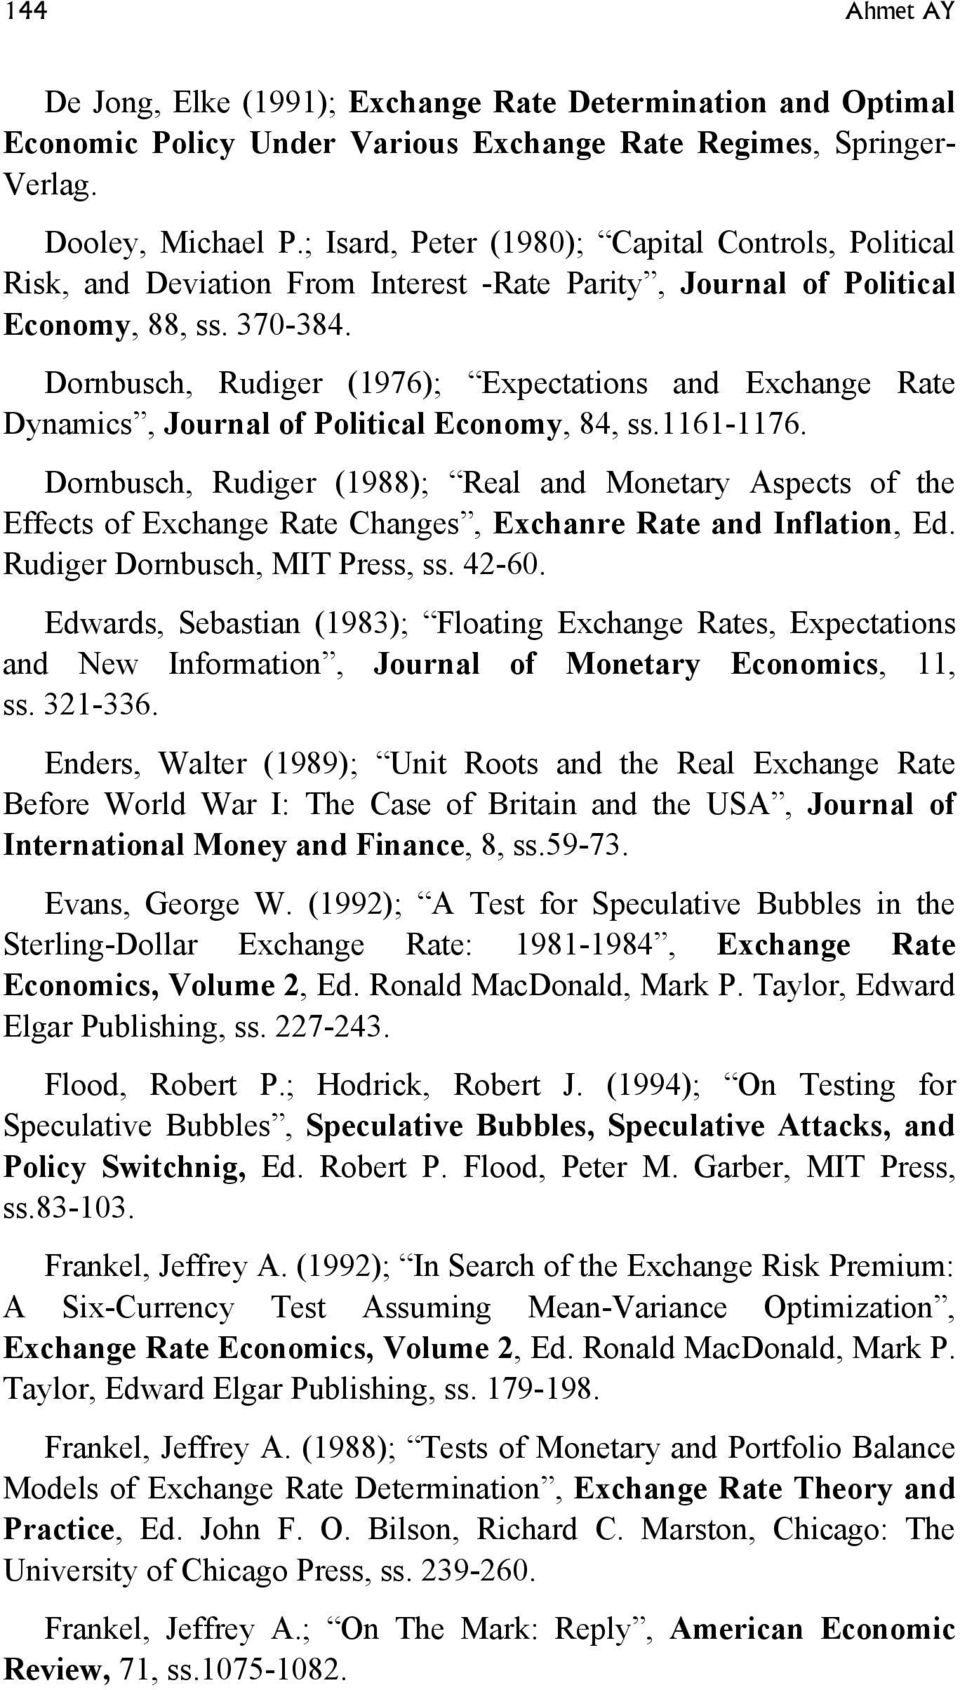 Dornbusch, Rudiger (1976); Expectations and Exchange Rate Dynamics, Journal of Political Economy, 84, ss.1161-1176.